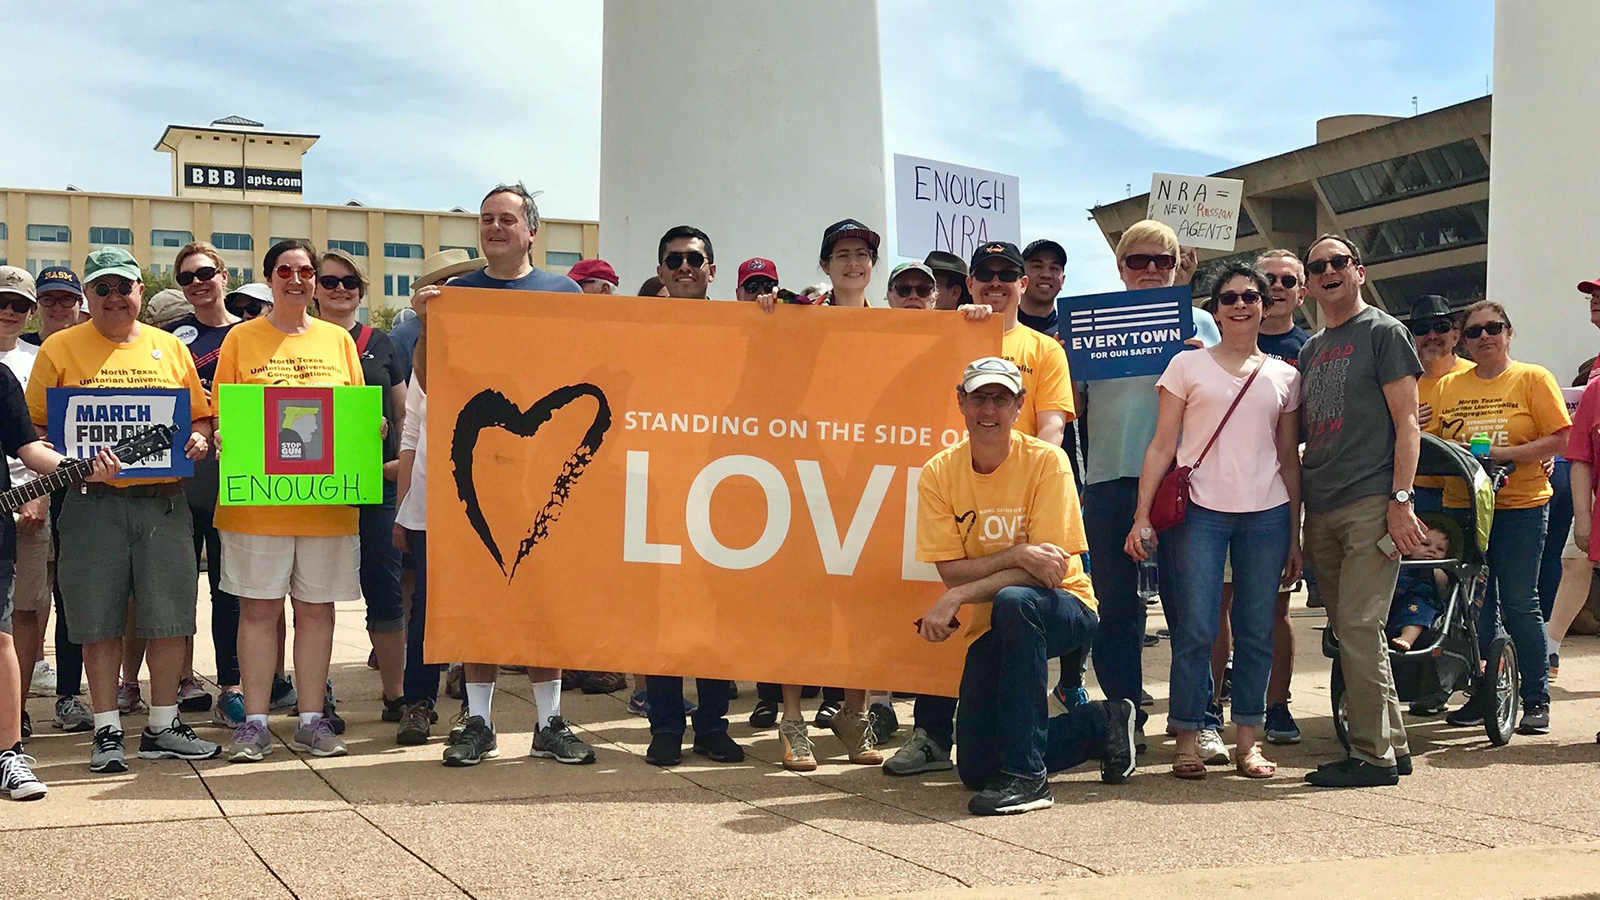 The Rev. Daniel Kanter, kneeling center, at a a Side of Love event in Dallas, Texas. Photo courtesy of Daniel Kanter